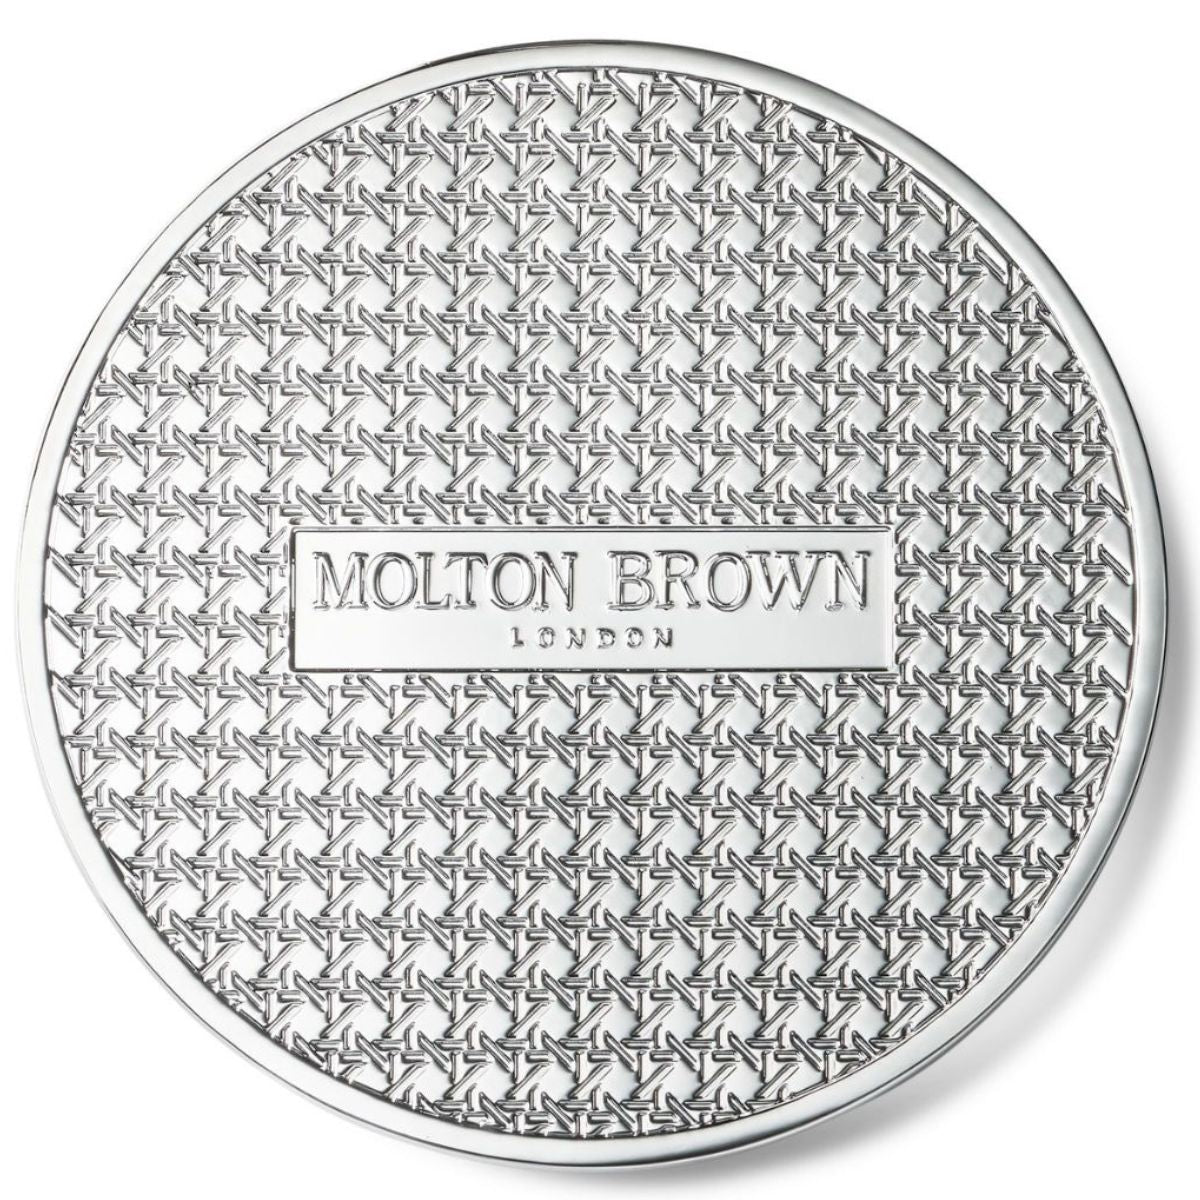 Molton Brown Luxury Triple Wick Candle Lid